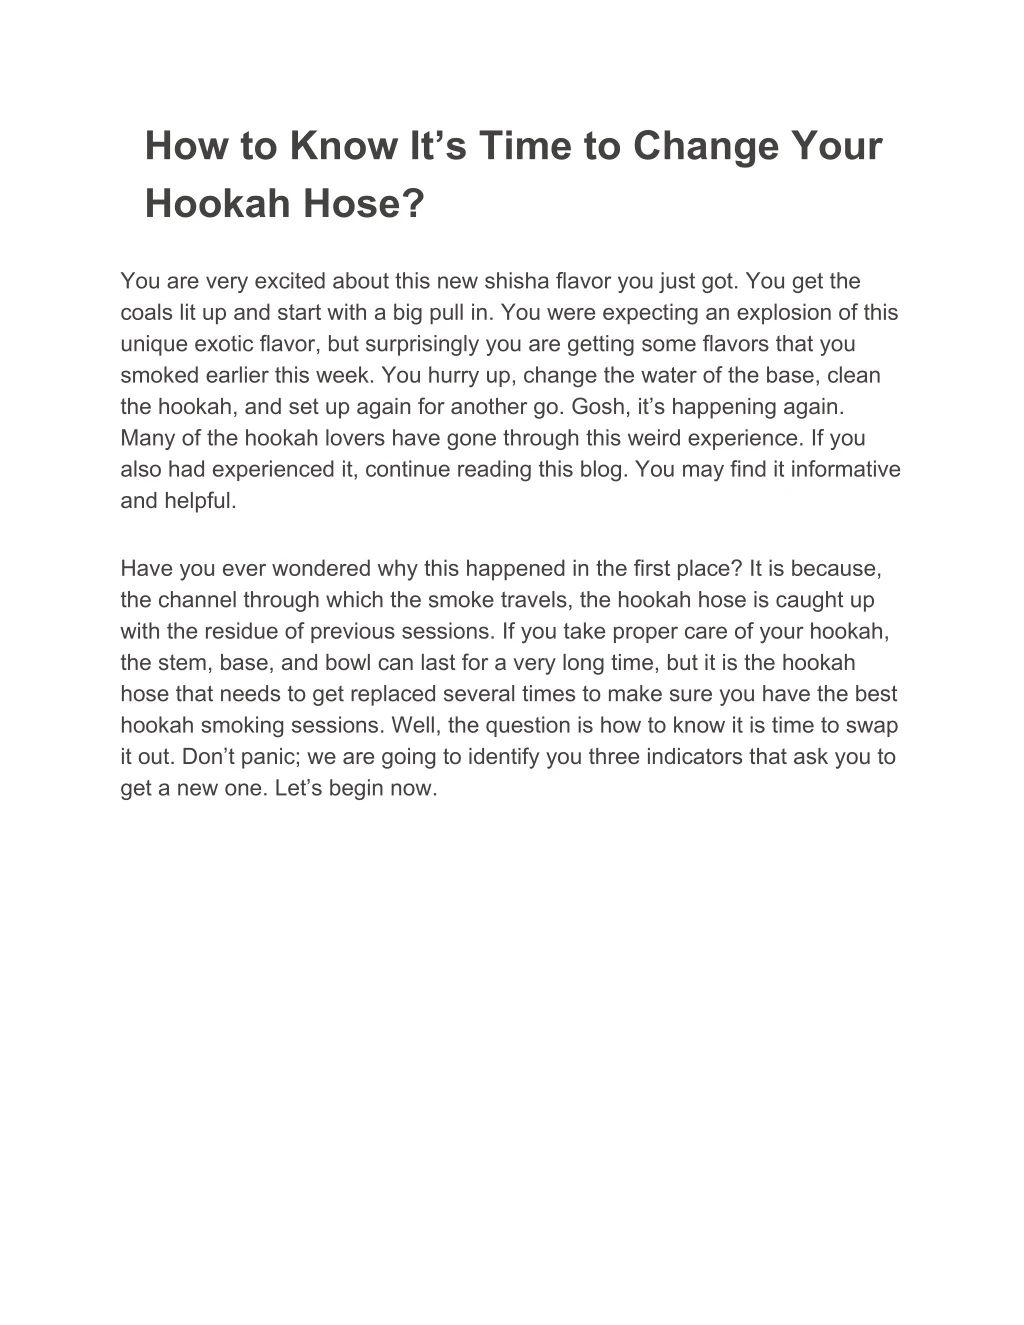 how to know it s time to change your hookah hose